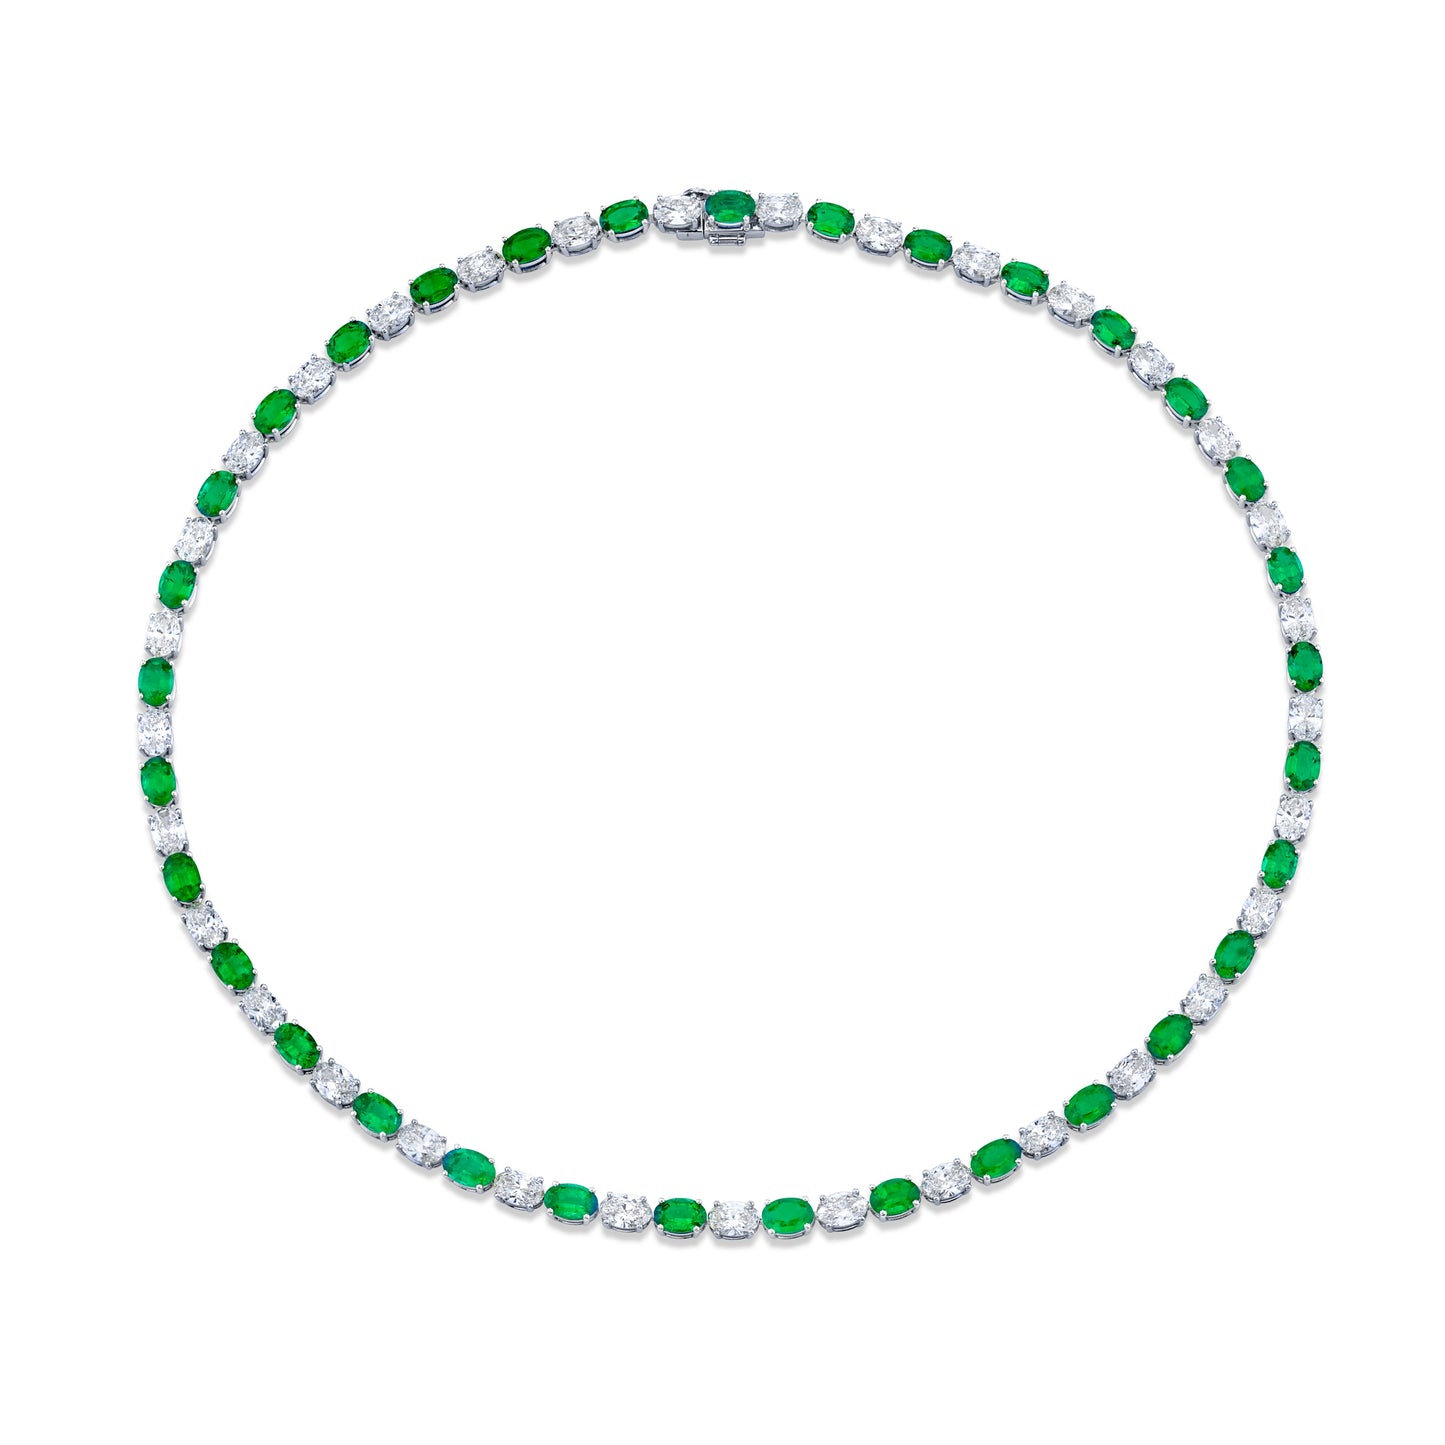 Alternating Oval-cut Diamonds and Green Emeralds Necklace